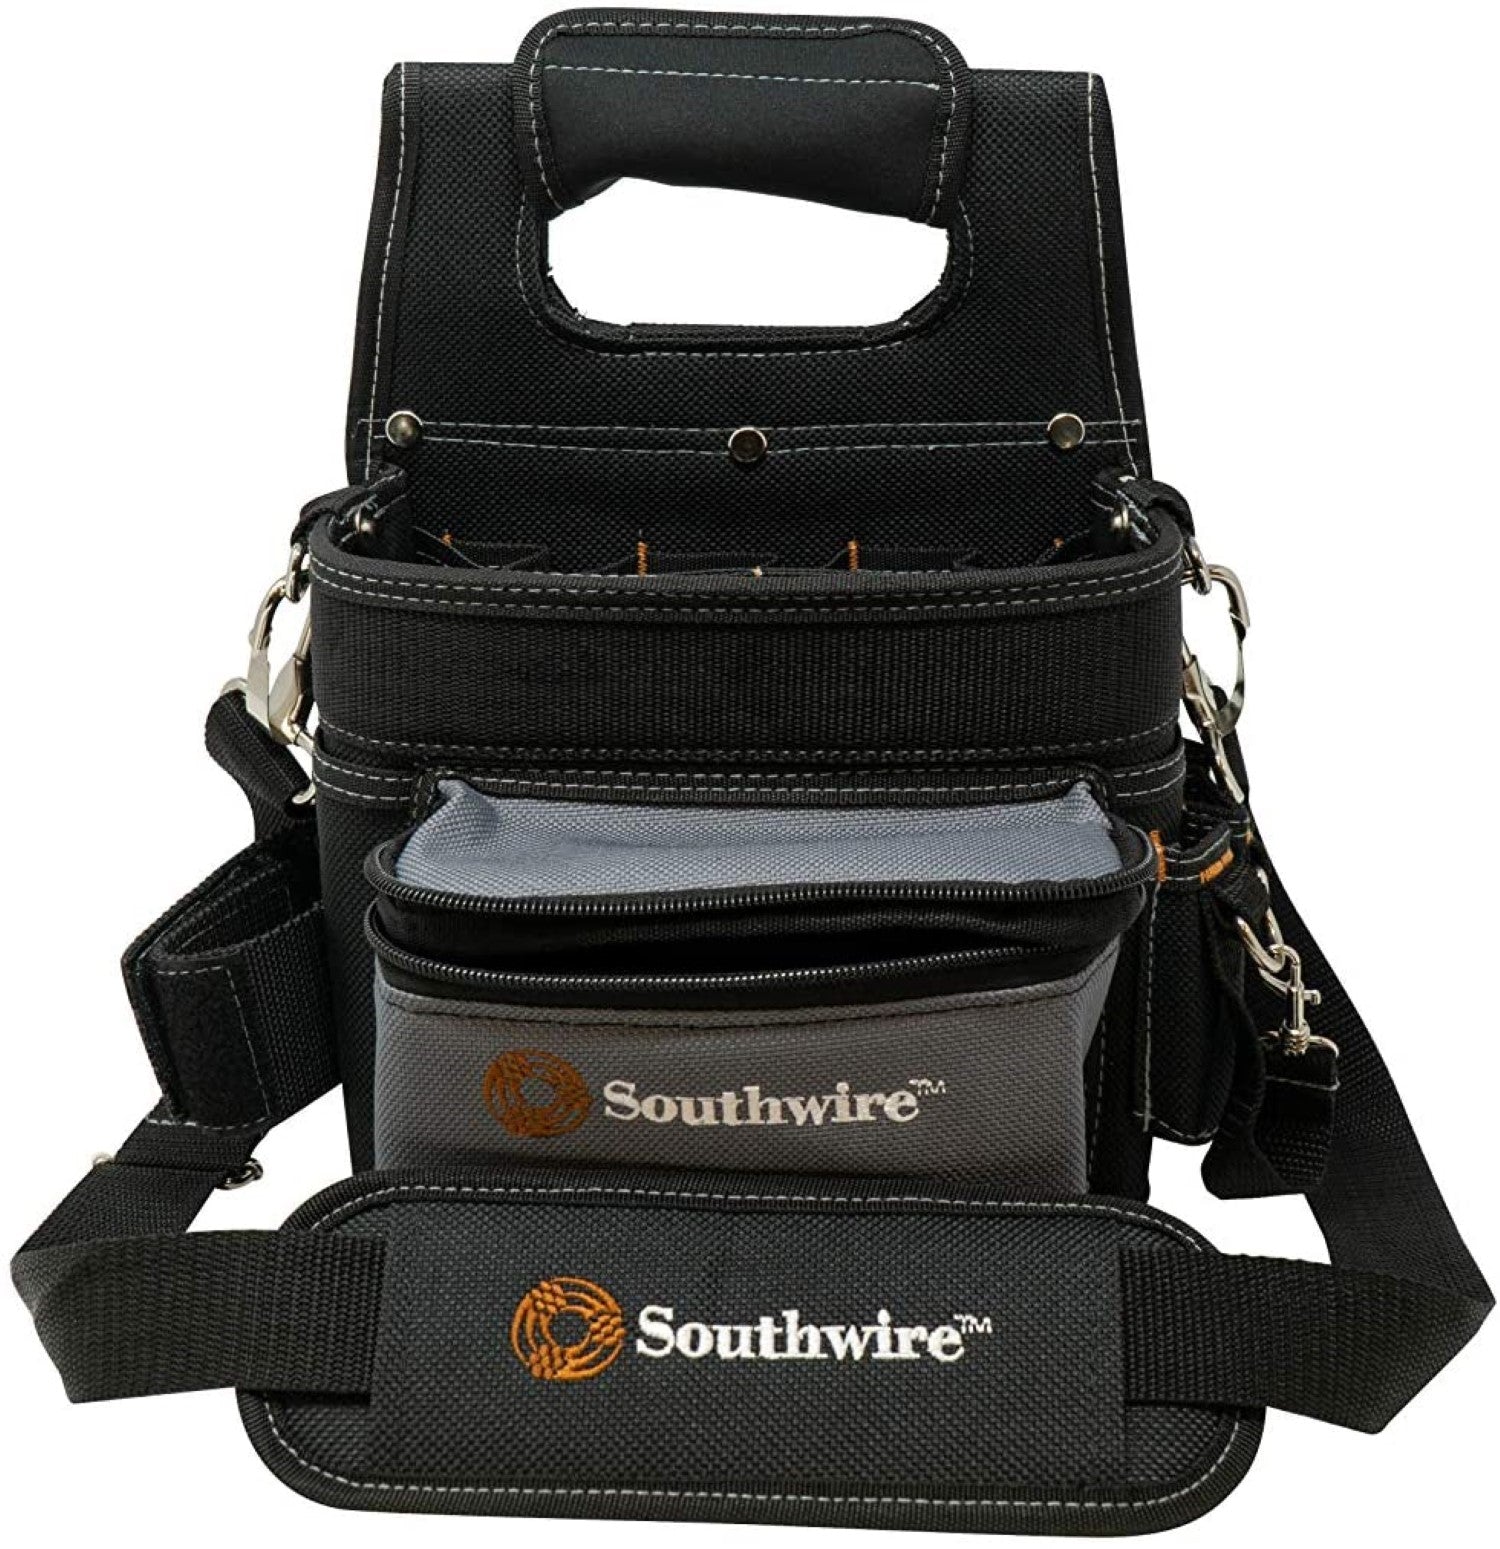 Southwire Tools & Equipment BAGESP Electrician's Shoulder Pouch Tool C